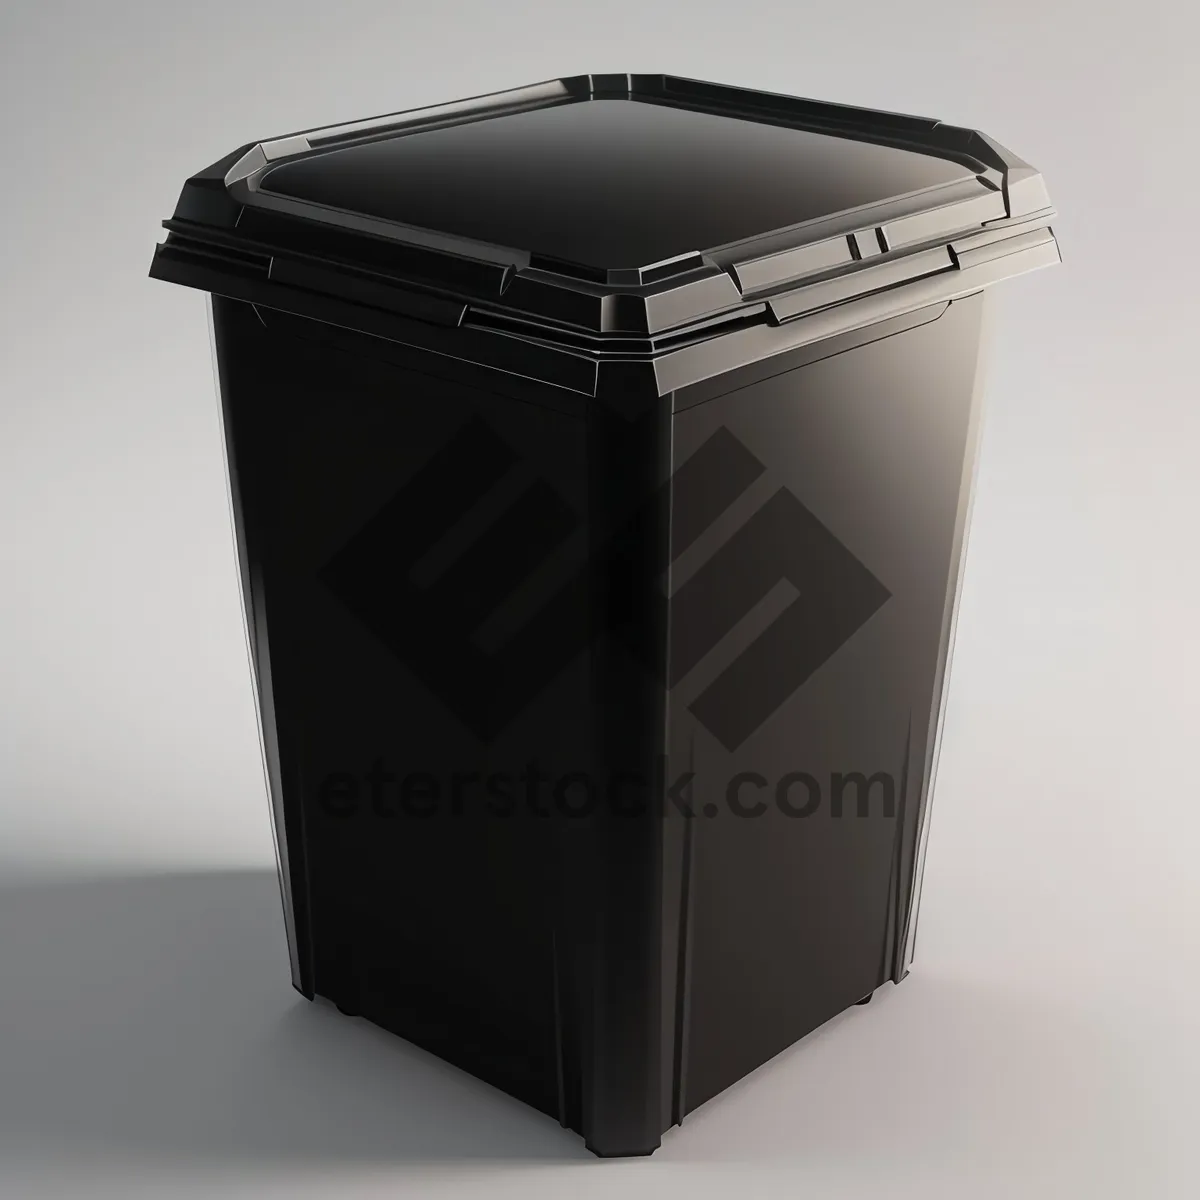 Picture of Recycle Bin: Eco-friendly Plastic Waste Disposal Solution